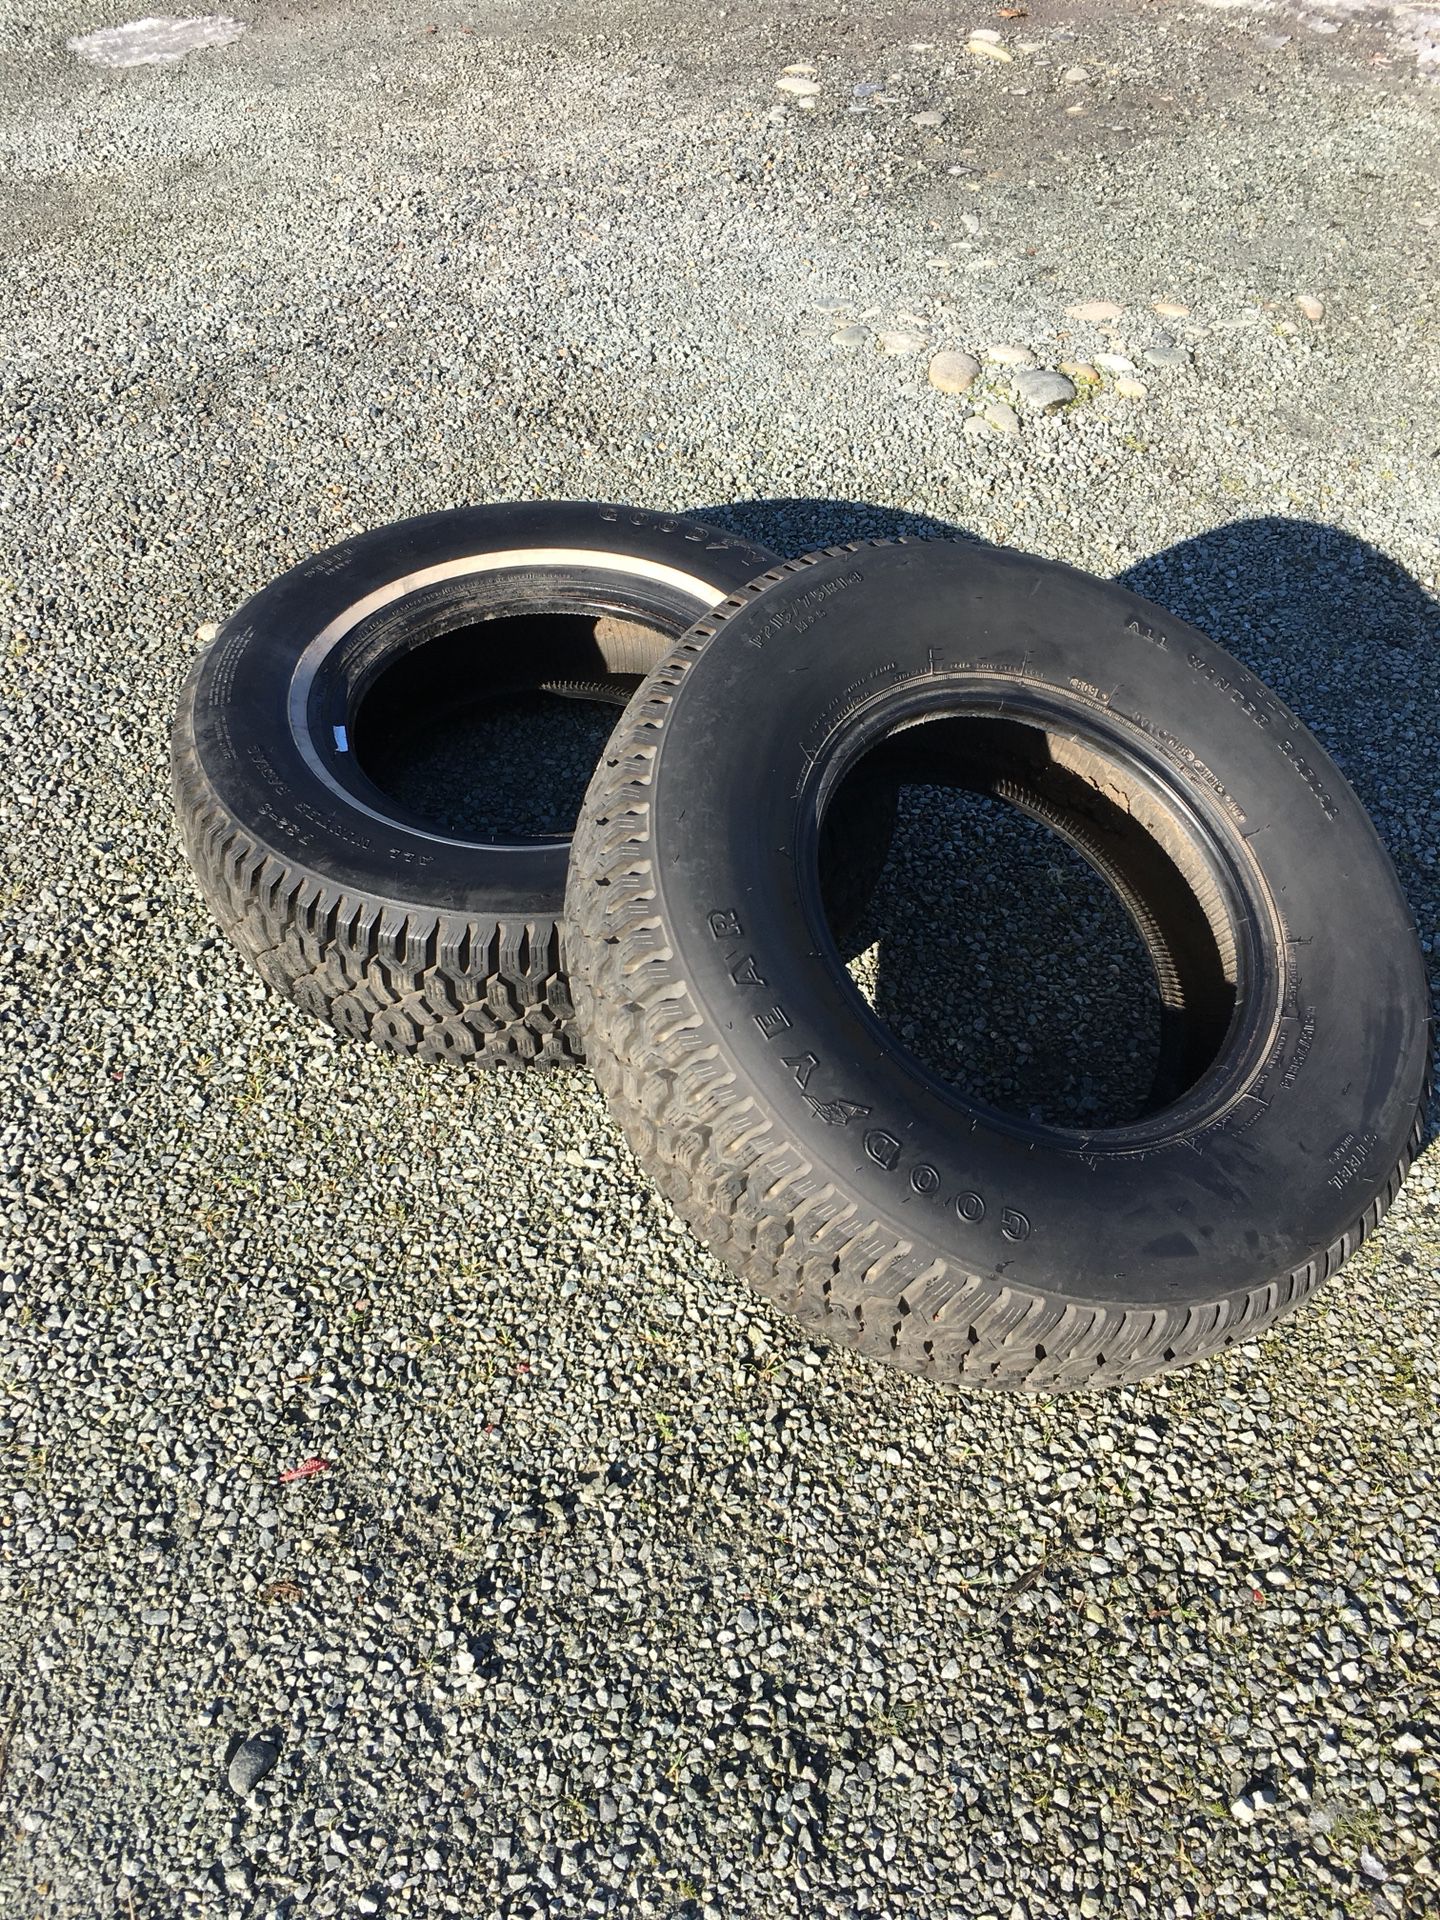 Snow Tires , from Chevy van